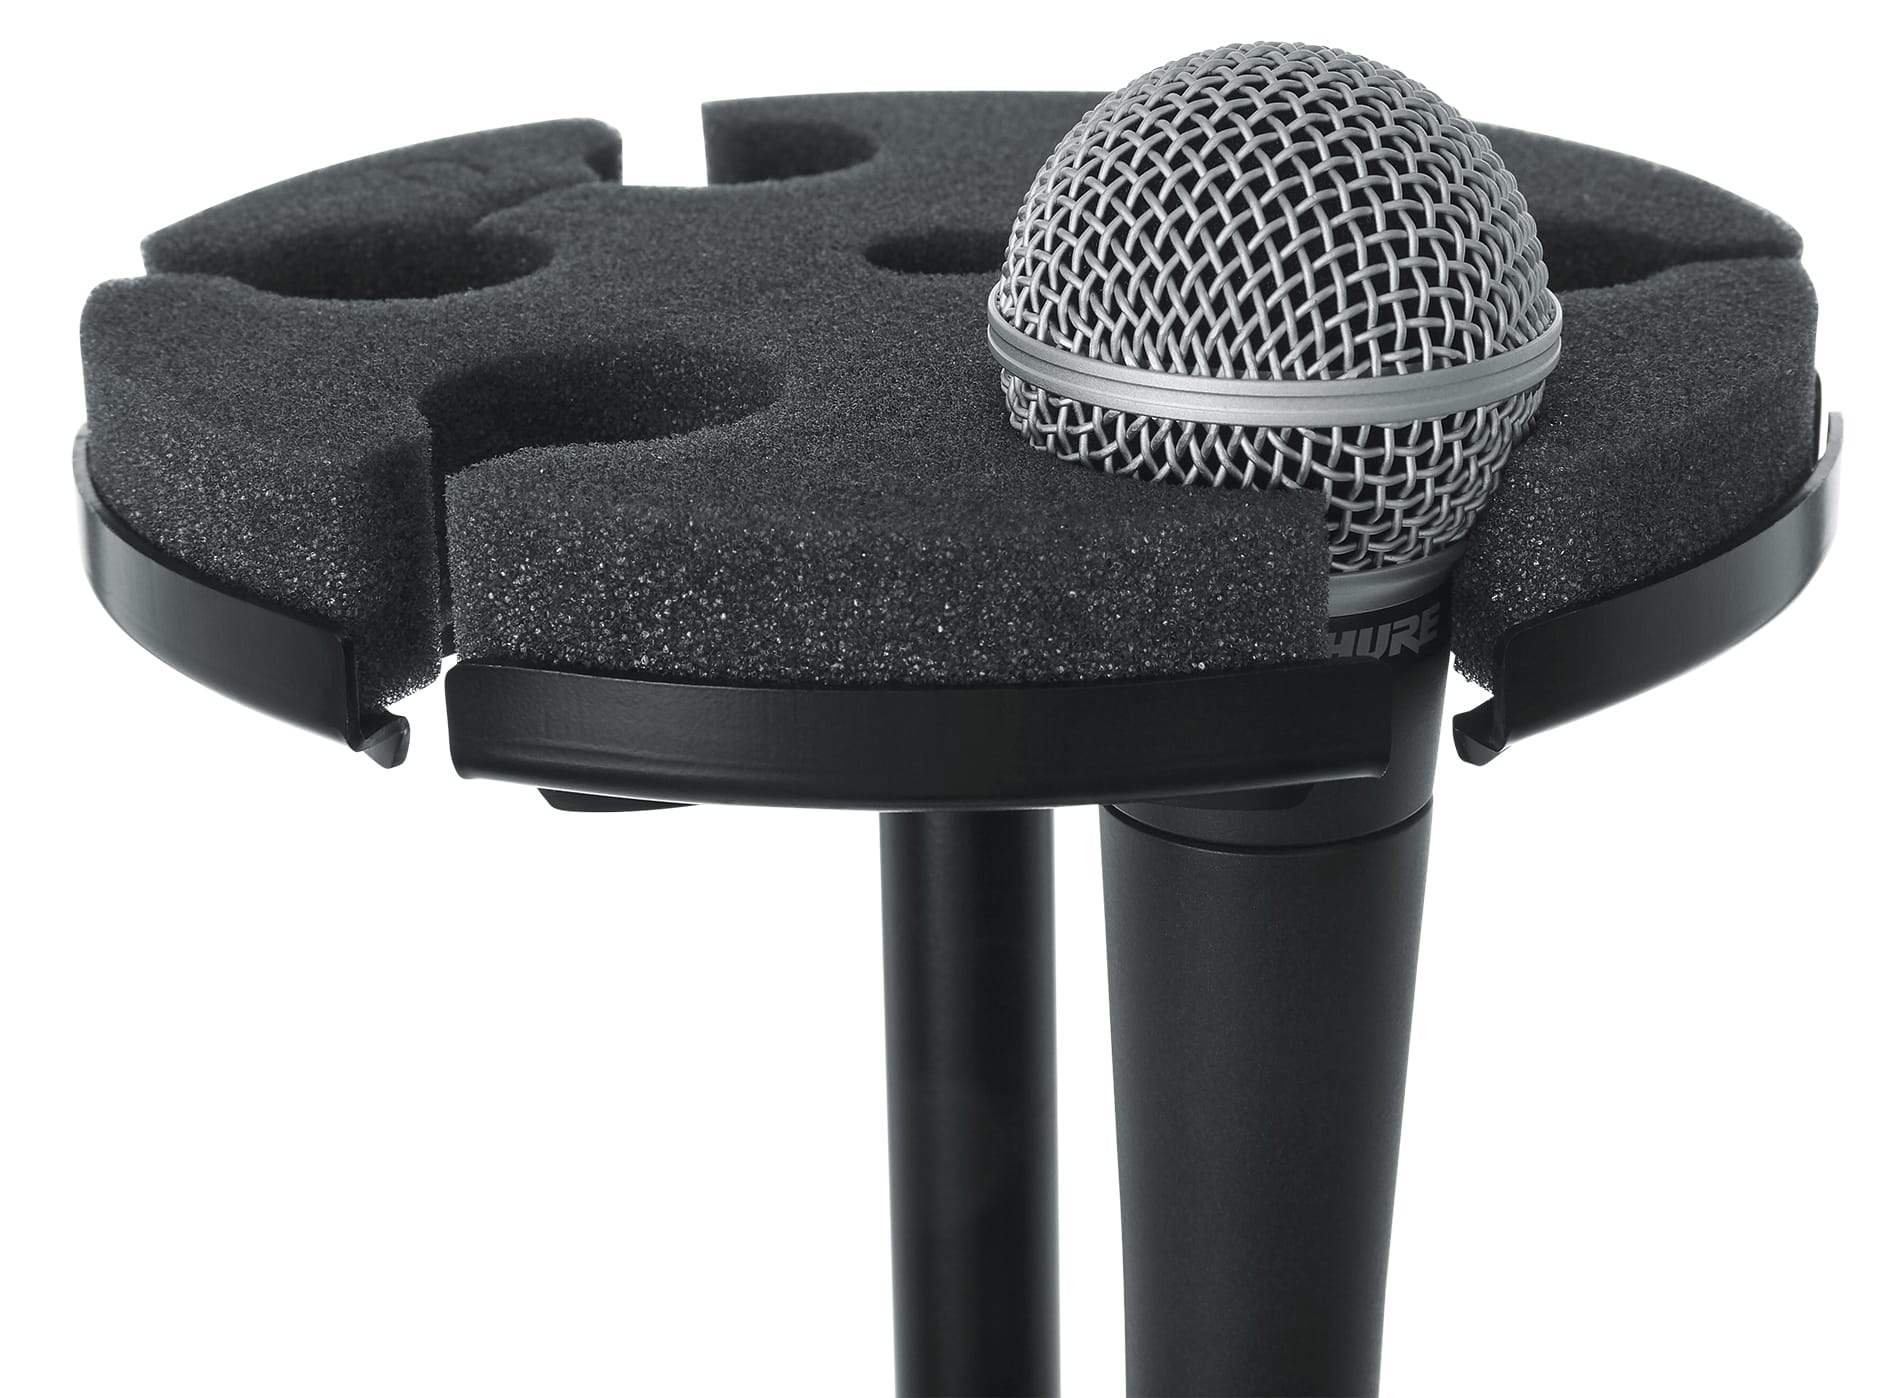 Multi Microphone Tray Designed To Hold 6 Mics-GFW-MIC-6TRAY